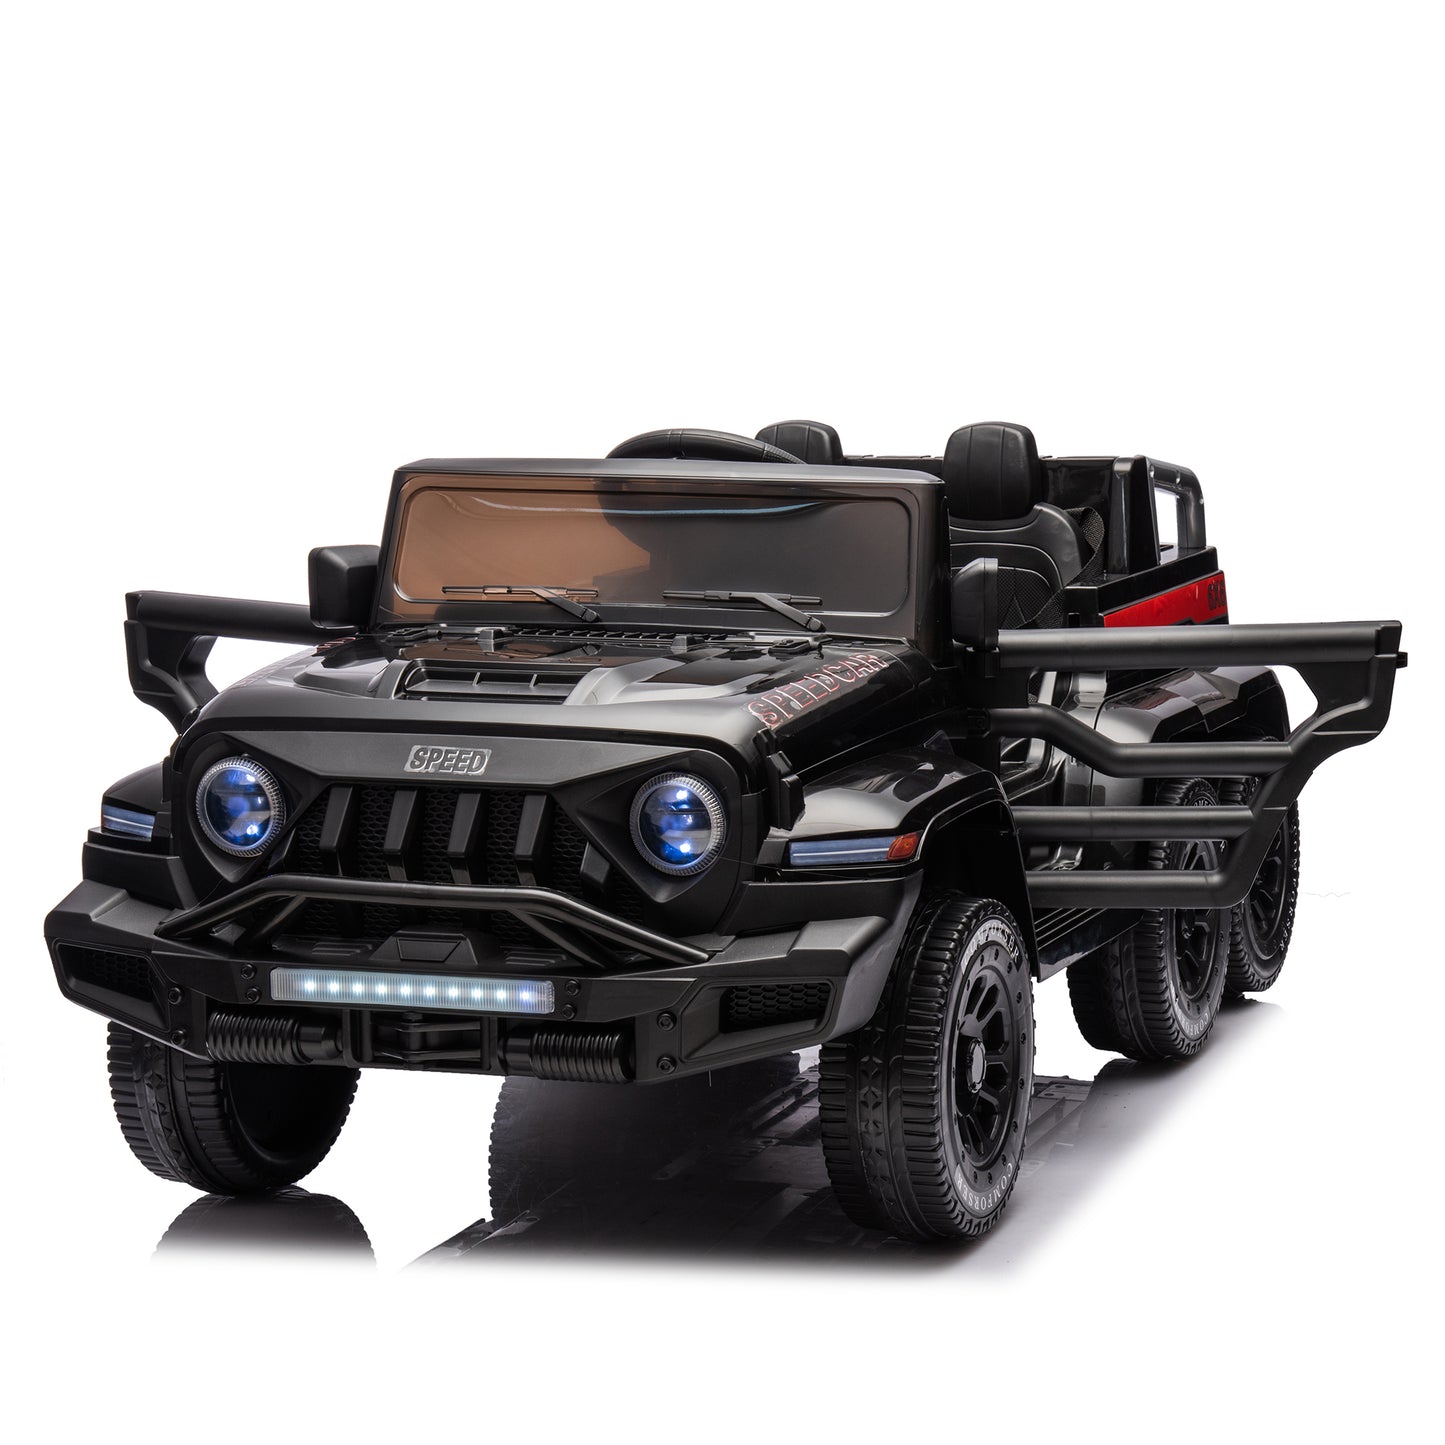 24V Ride On Car for Kids Battery Powered Ride On 4WD Toys with Remote Control,Parents Can Assist in Driving,Music and Lights,Five-Point Safety Belt,Rocking chair mode for back-and-forth swinging